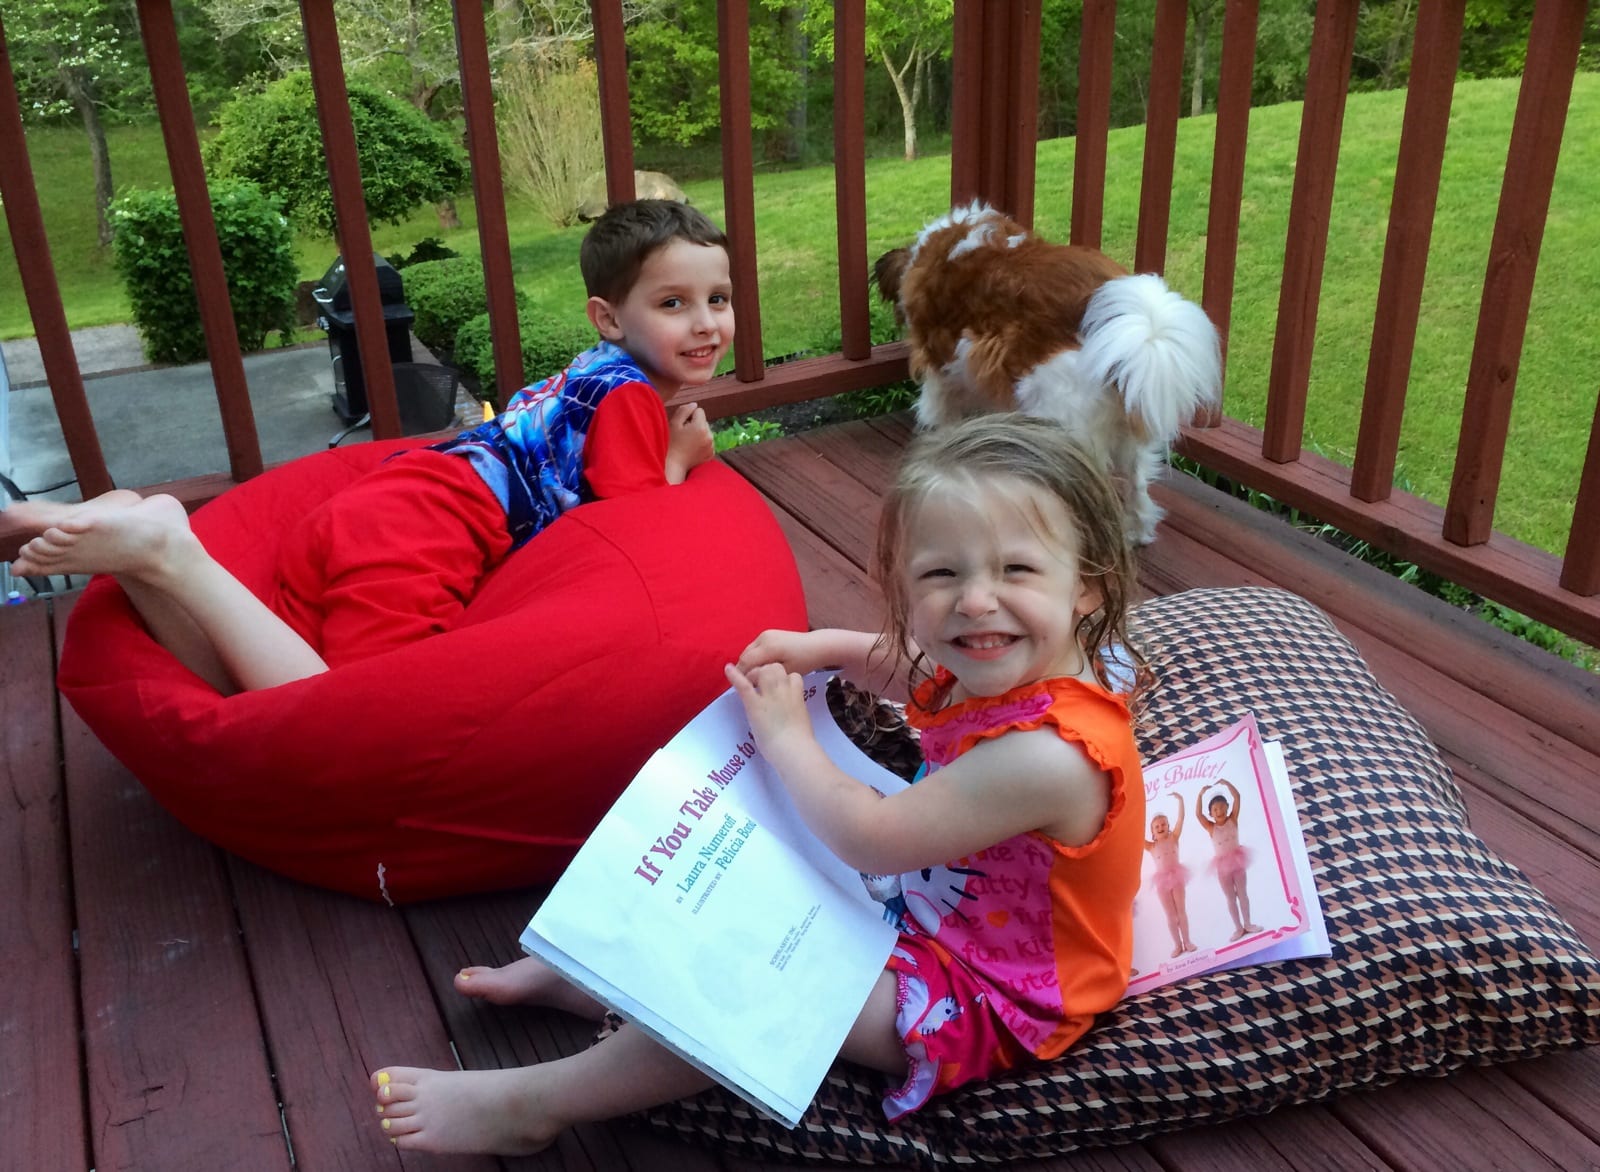 My favorite part of the day. Reading to the kids on the deck.